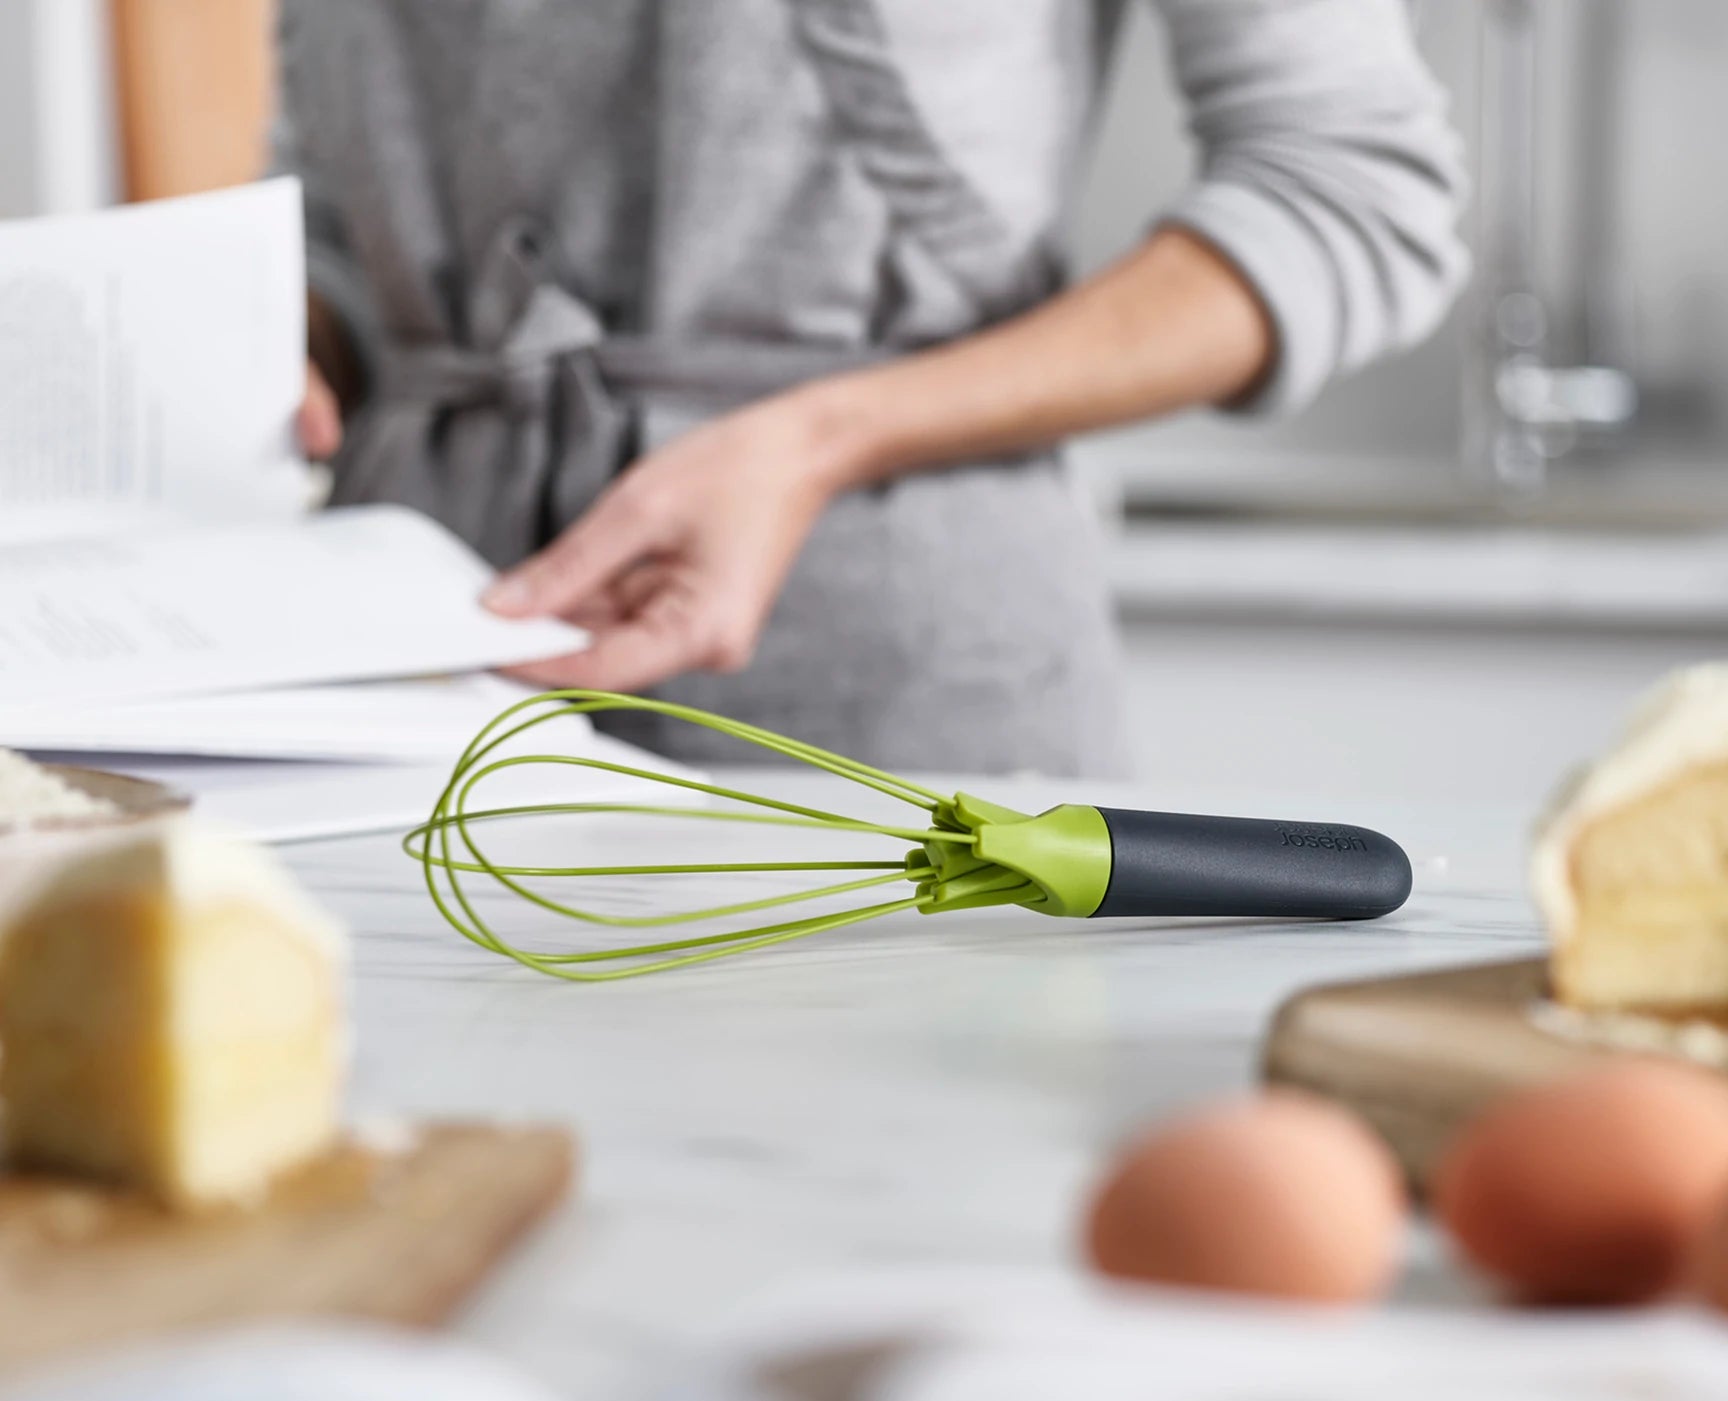 Joseph Joseph Twist™ Whisk: Two in One- Is It Too Good to Be True?